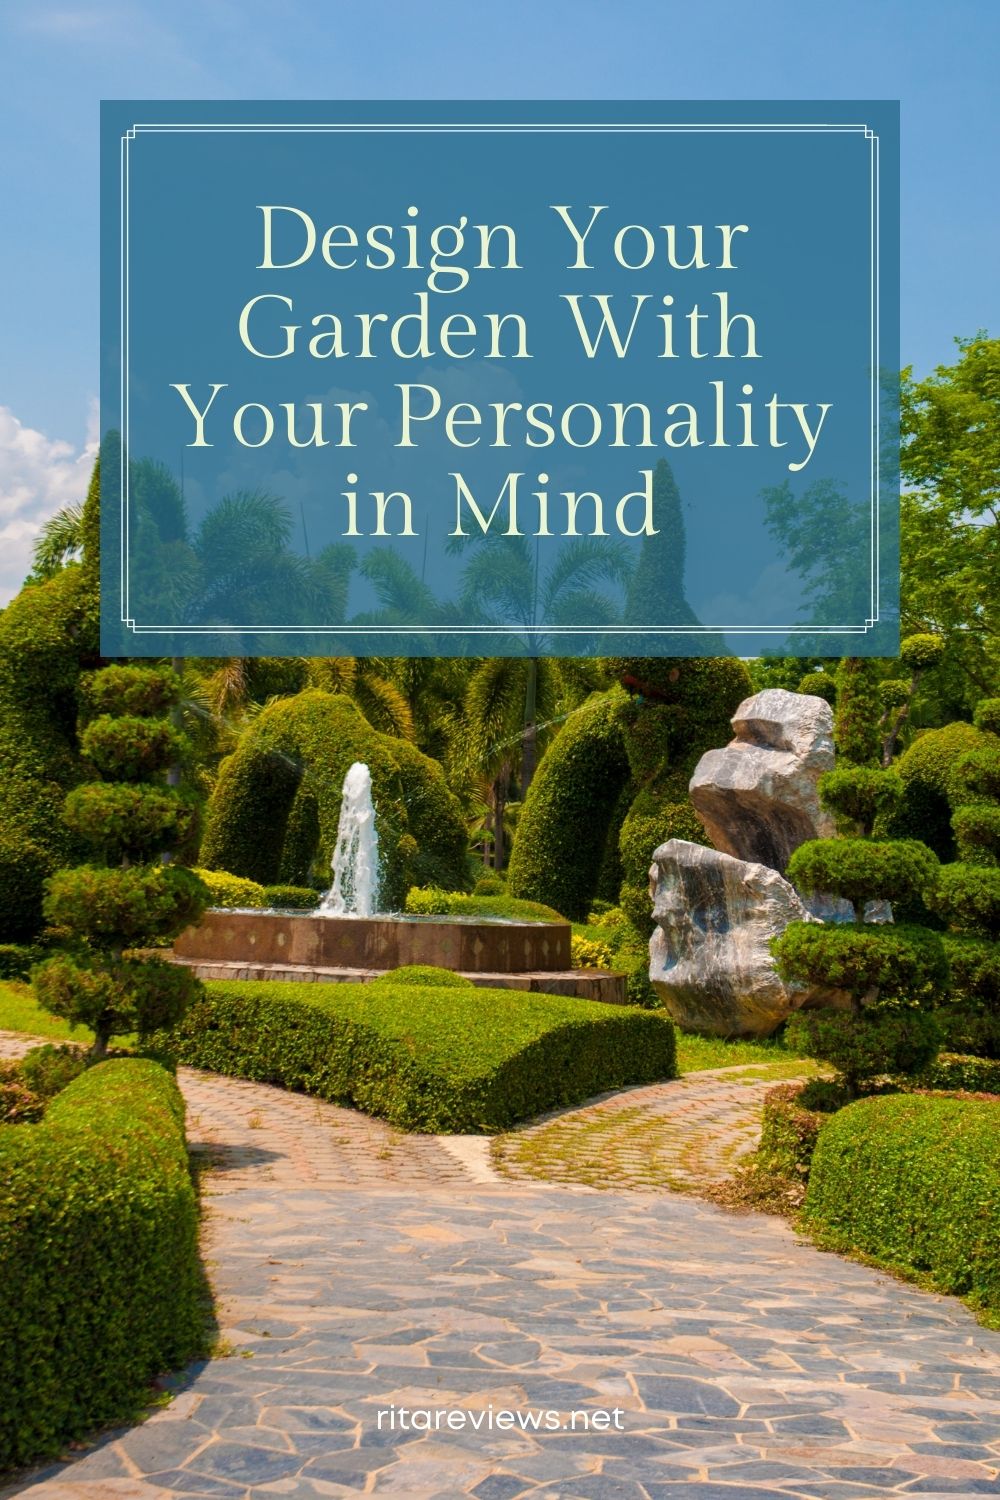 Design Your Garden With Your Personality in Mind - Rita Reviews